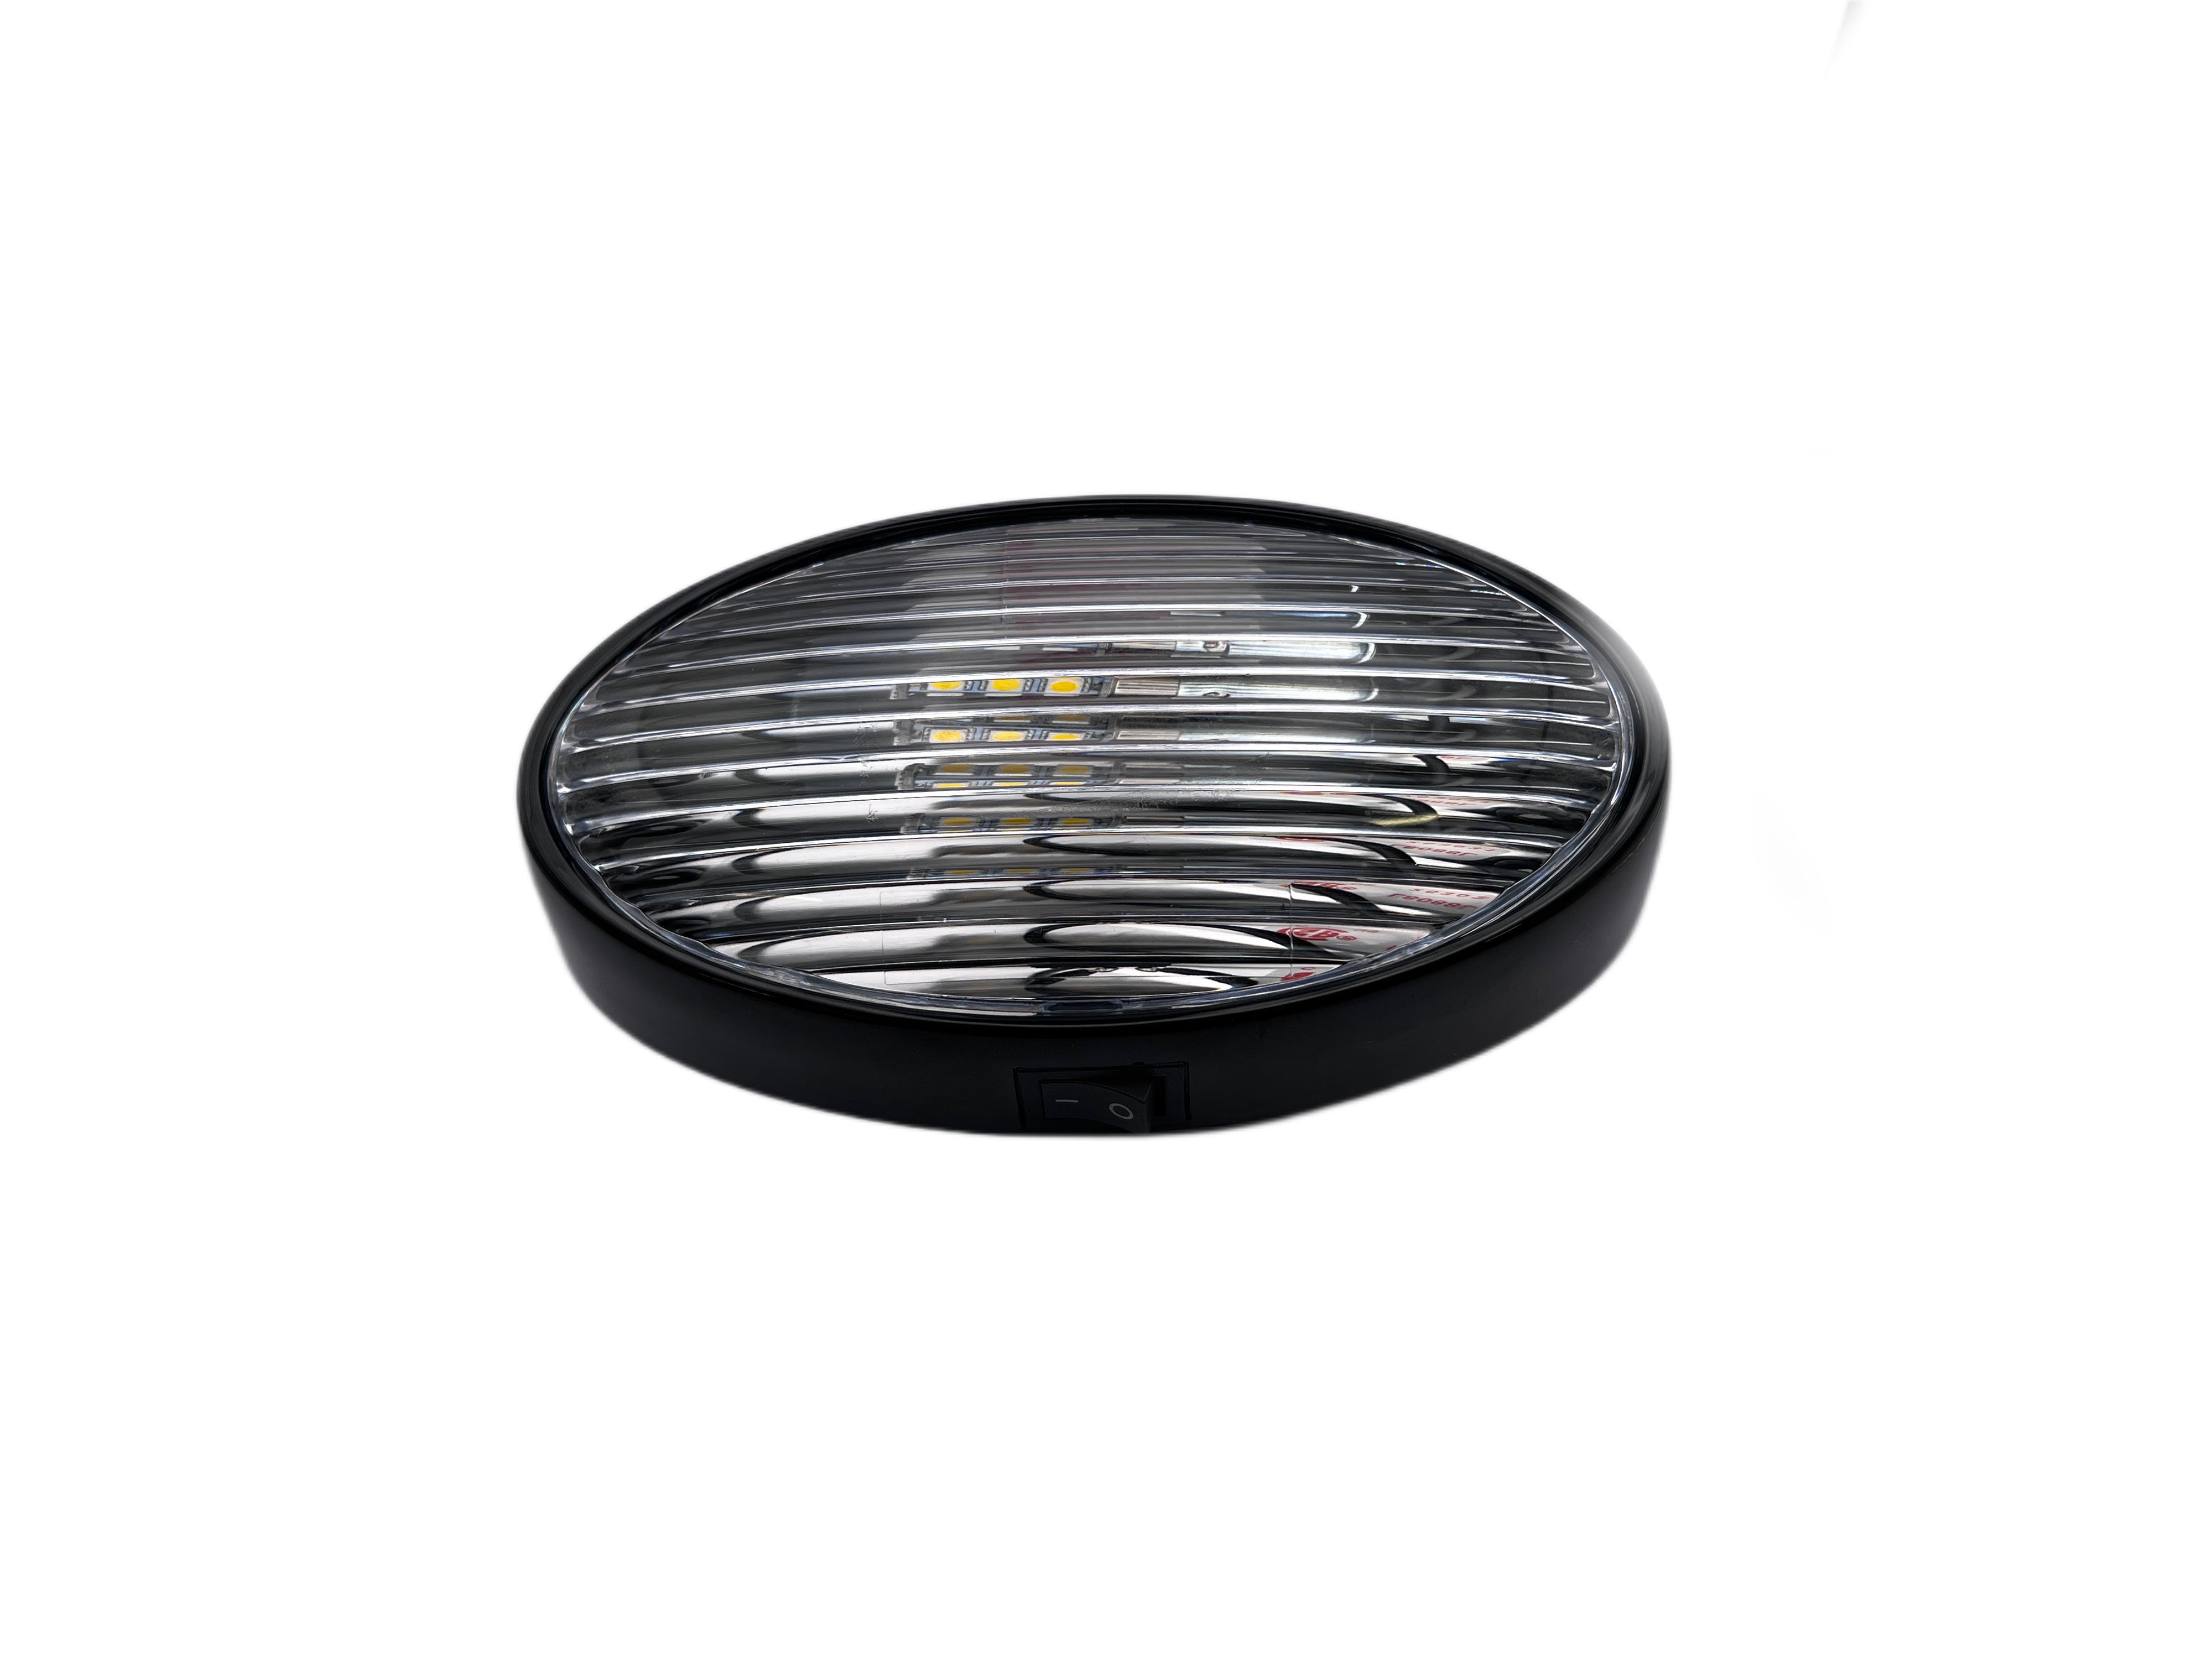 RV Designer L860 LED Oval Porch Light with On/Off Switch